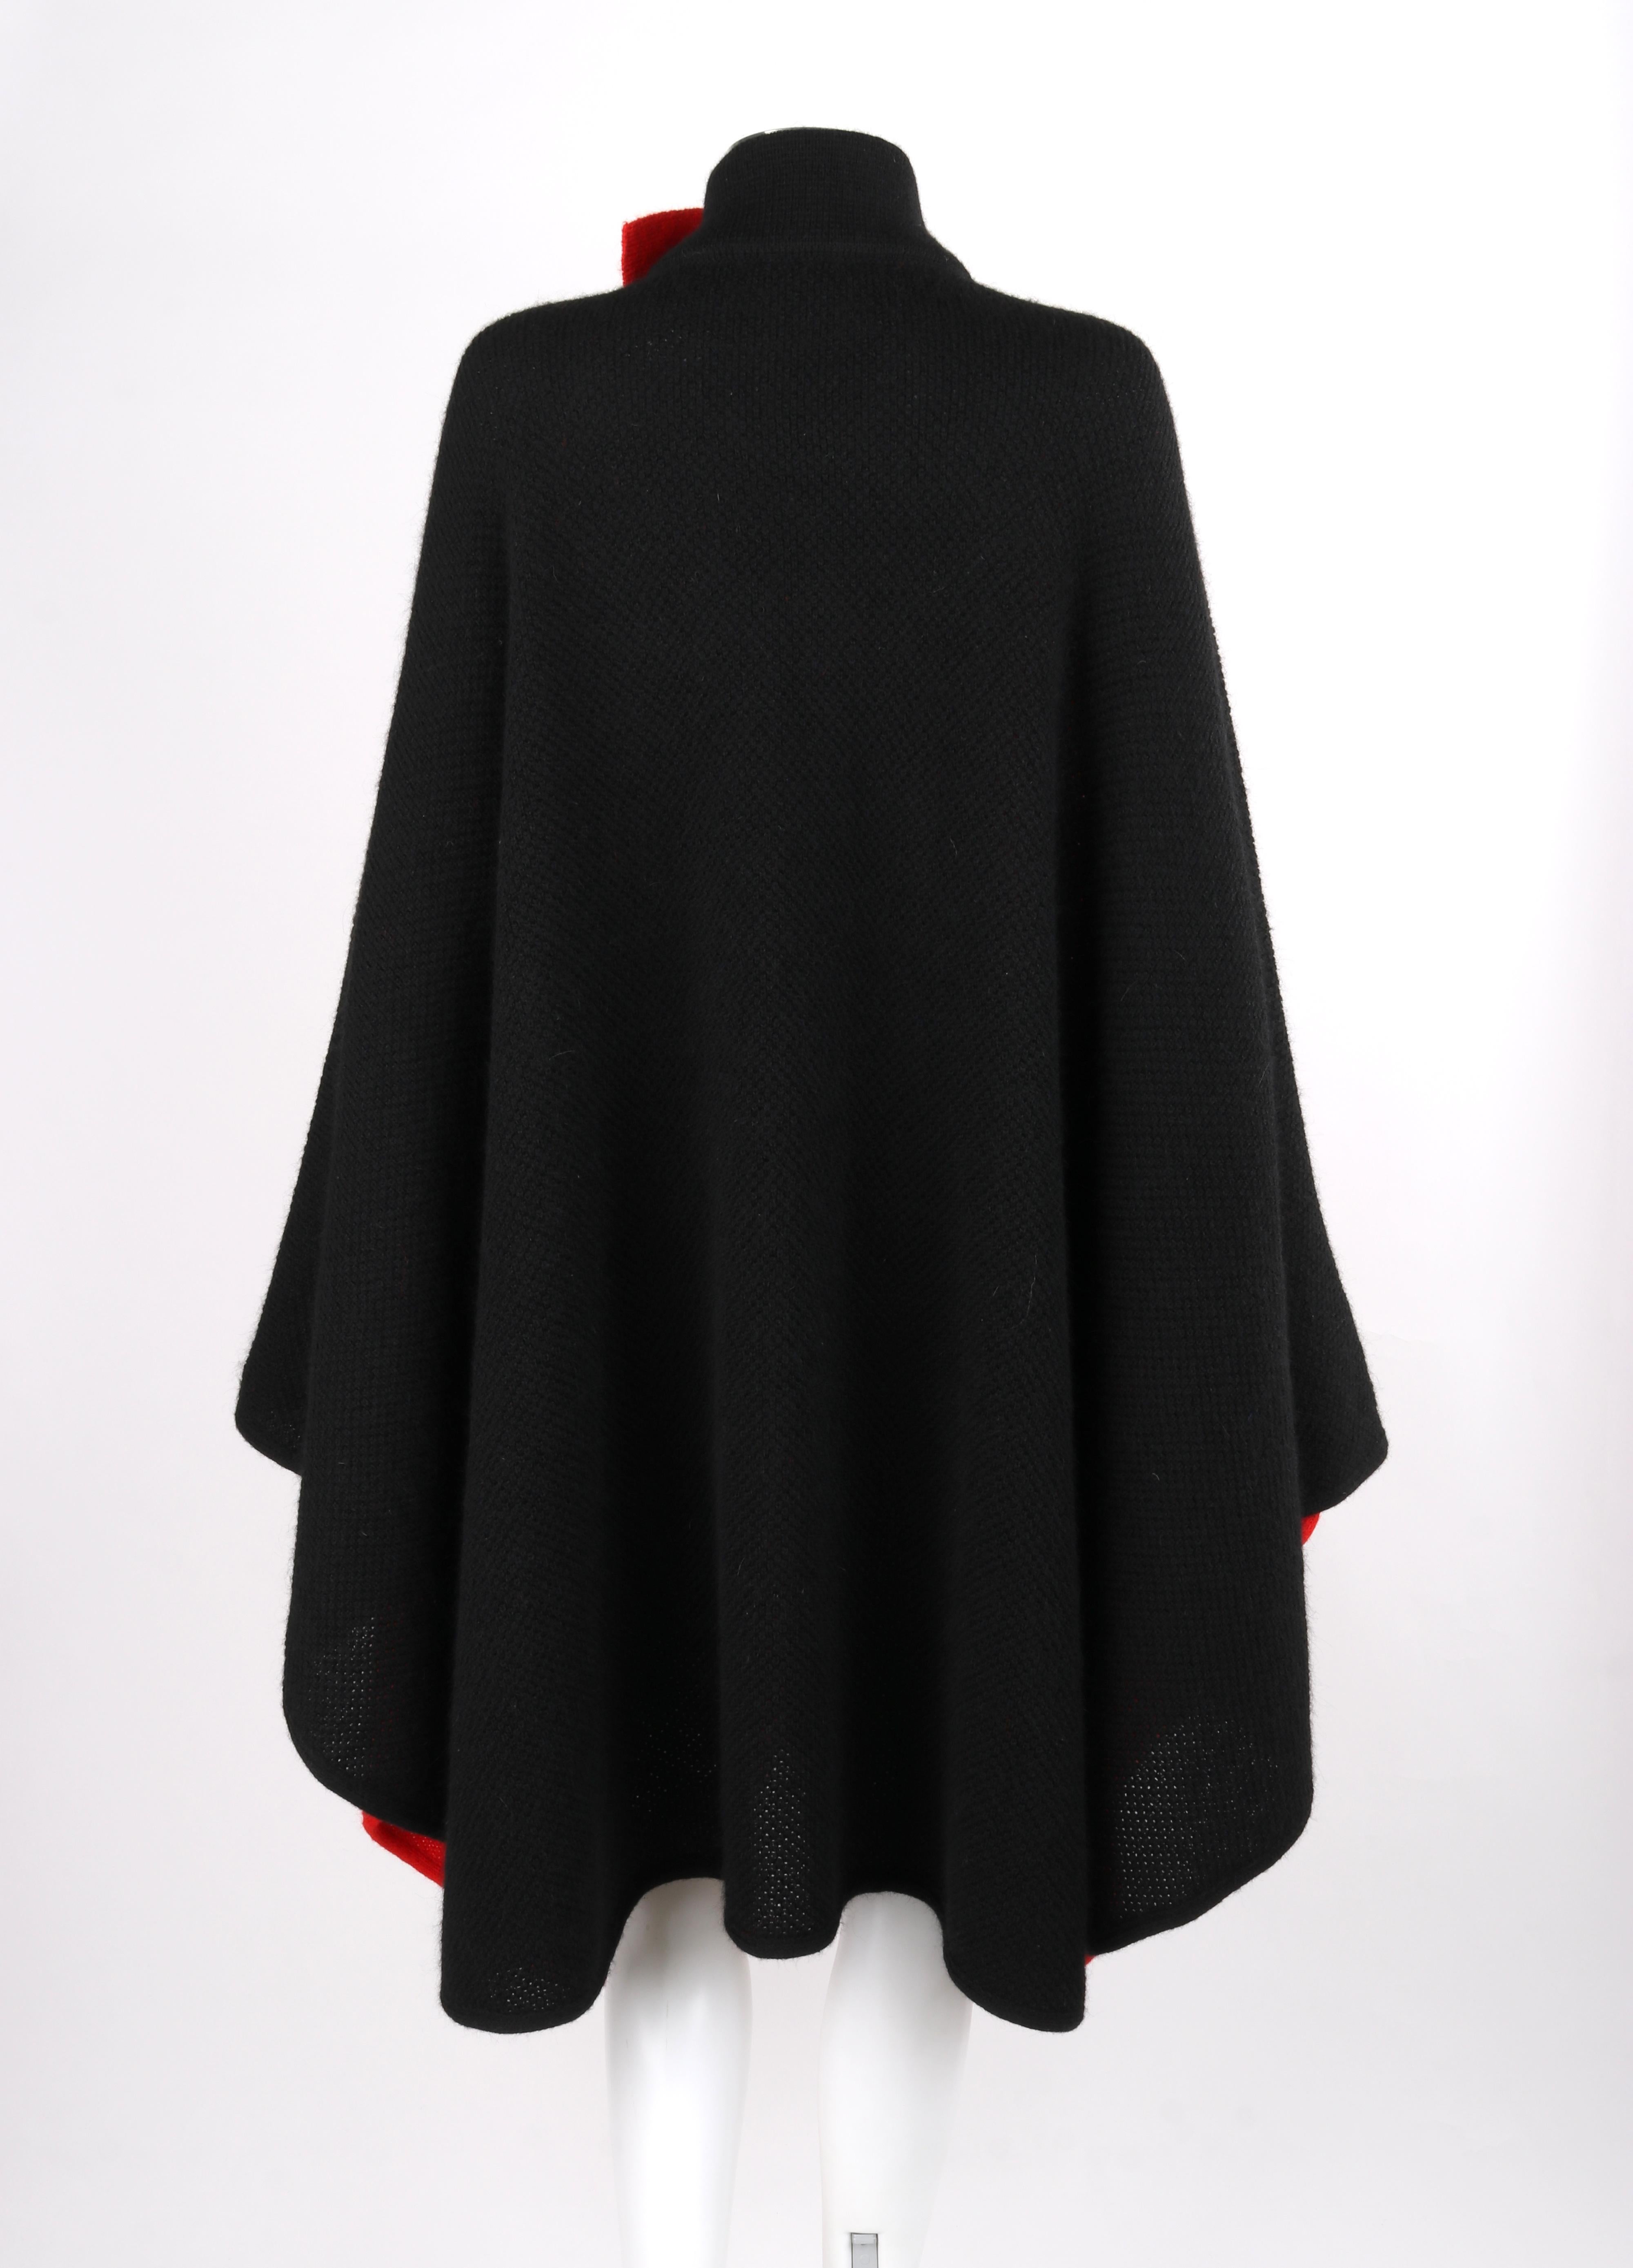 VALENTINO Knitwear c.1980's Vtg Red Black Alpaca Wool Knit Scarf Tie Button Cape For Sale 4